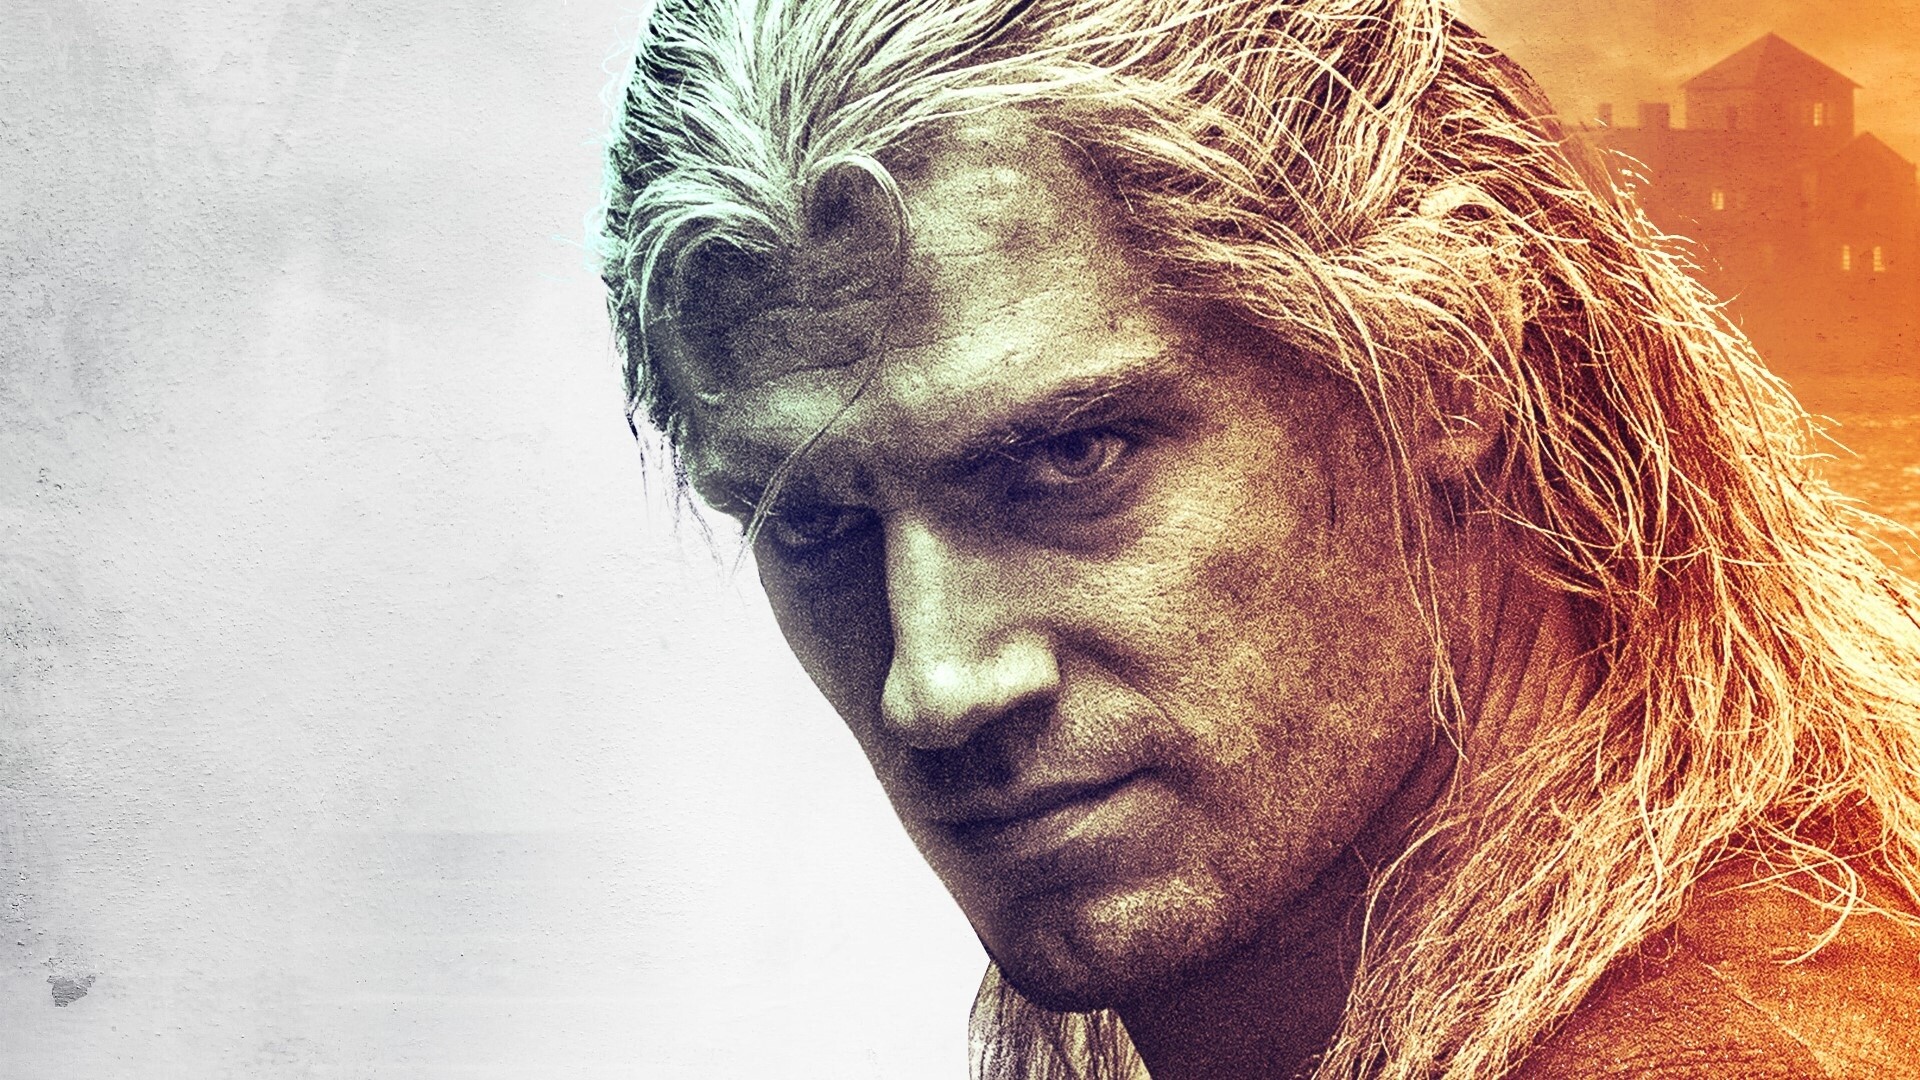 The Witcher Season 2: Netflix, Geralt of Rivia, linked to Ciri by destiny. 1920x1080 Full HD Background.